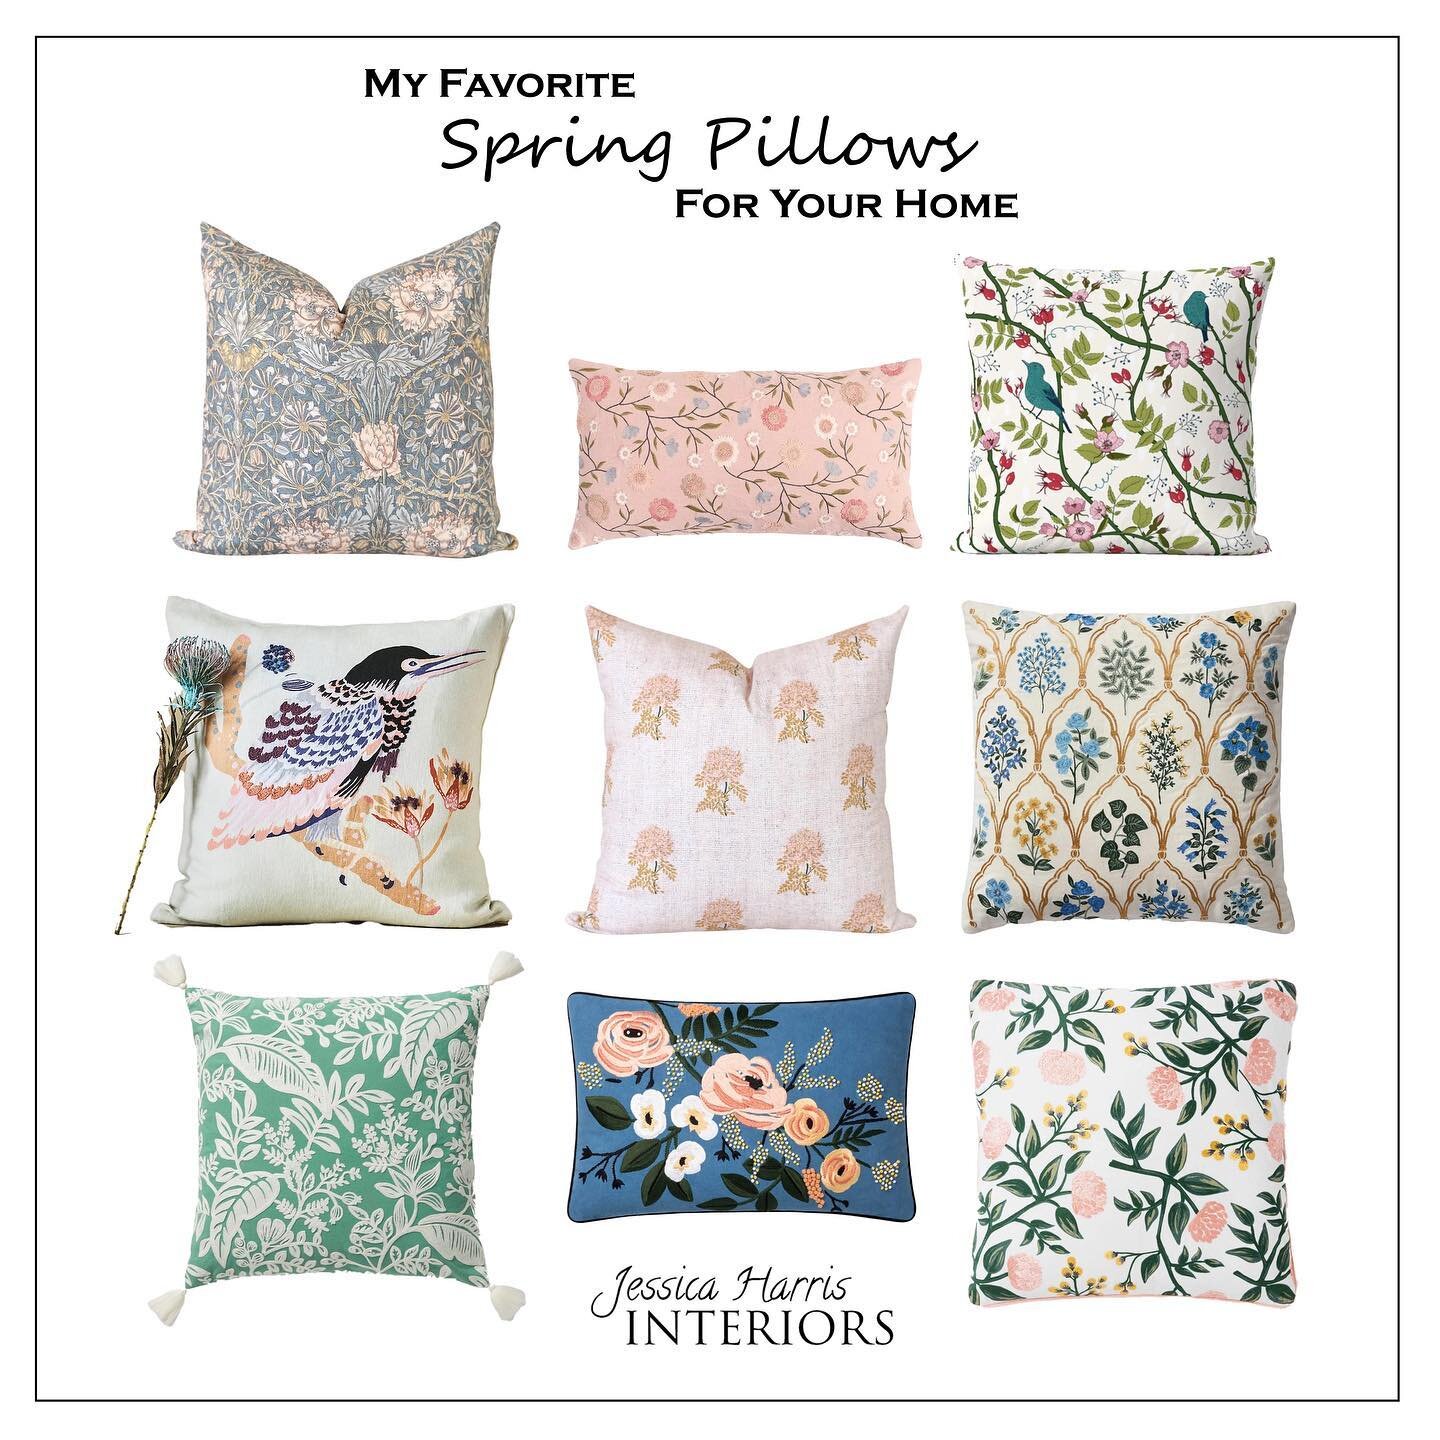 Pillows are the perfect and most affordable way to add color to your room. These are some of my favorite spring pillows. To shop these pillows click the link in my bio for my latest blog post. 

#springpillows #spring #springhomedecor #interiordesign